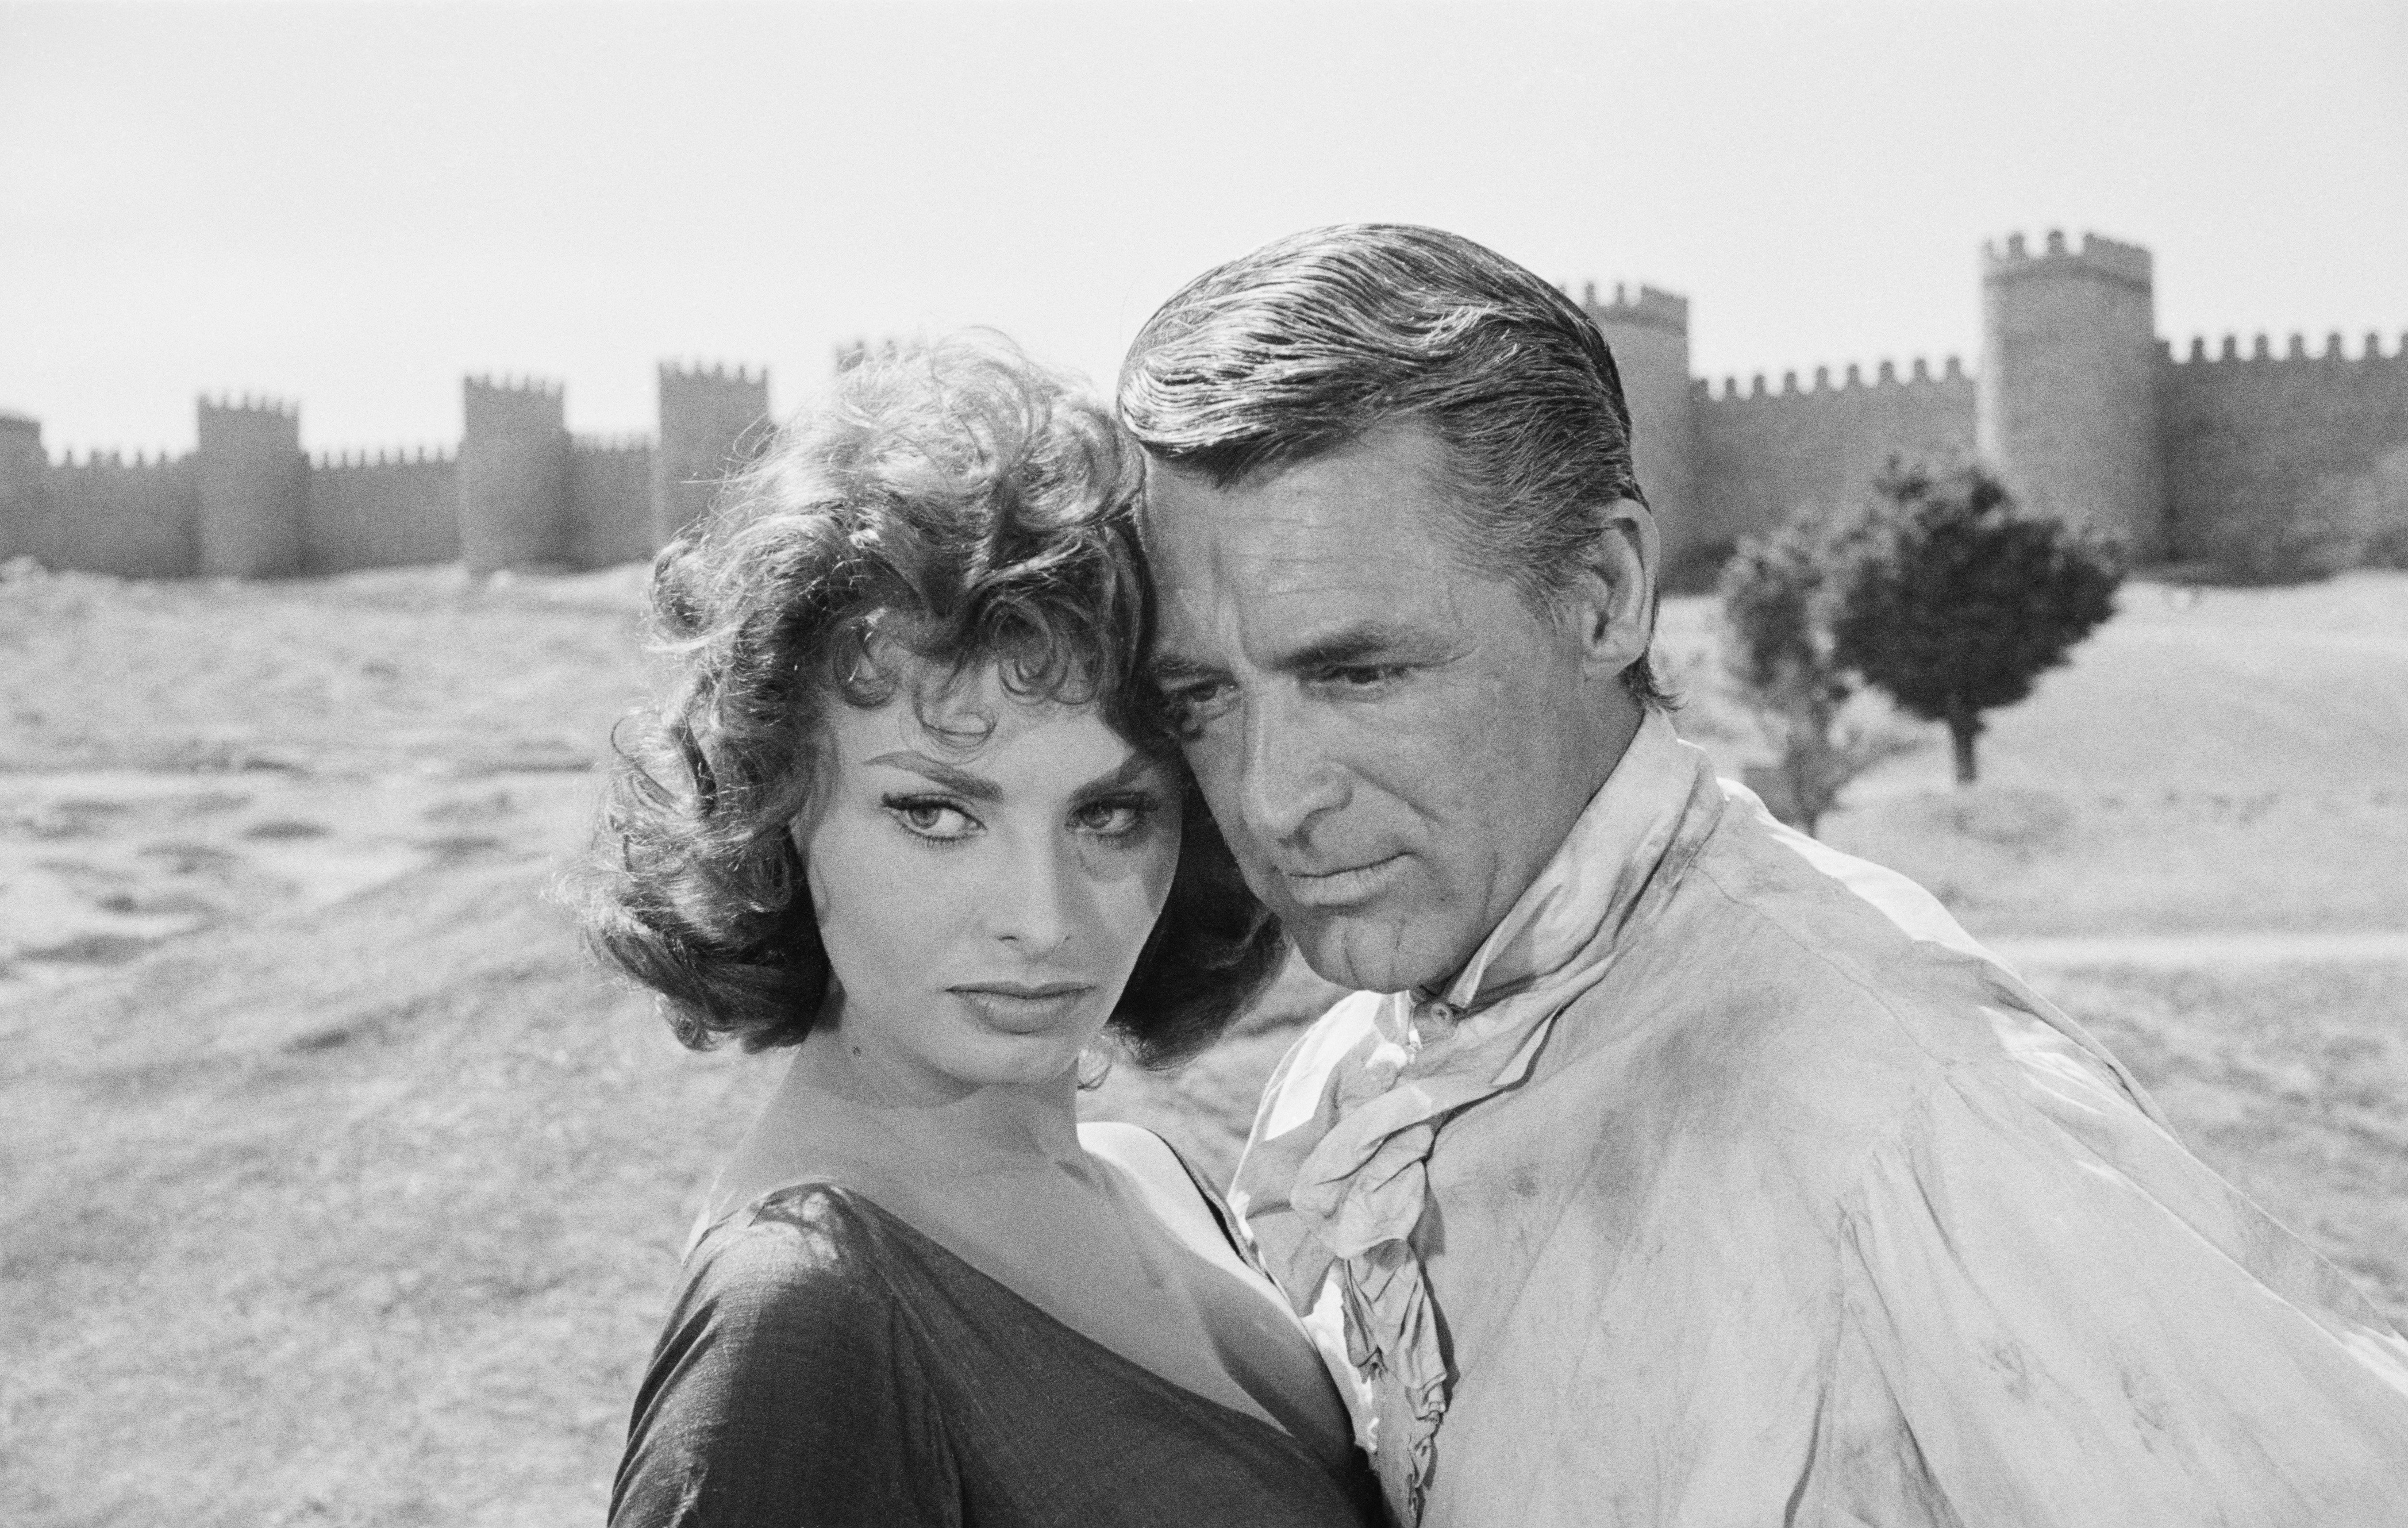 Sophia Loren and Cary Grant outside the walls of Avila, Spain, during the filming for "The Pride and the Passion," 1956. | Source: Ernst Haas/Hulton Archive/Getty Images